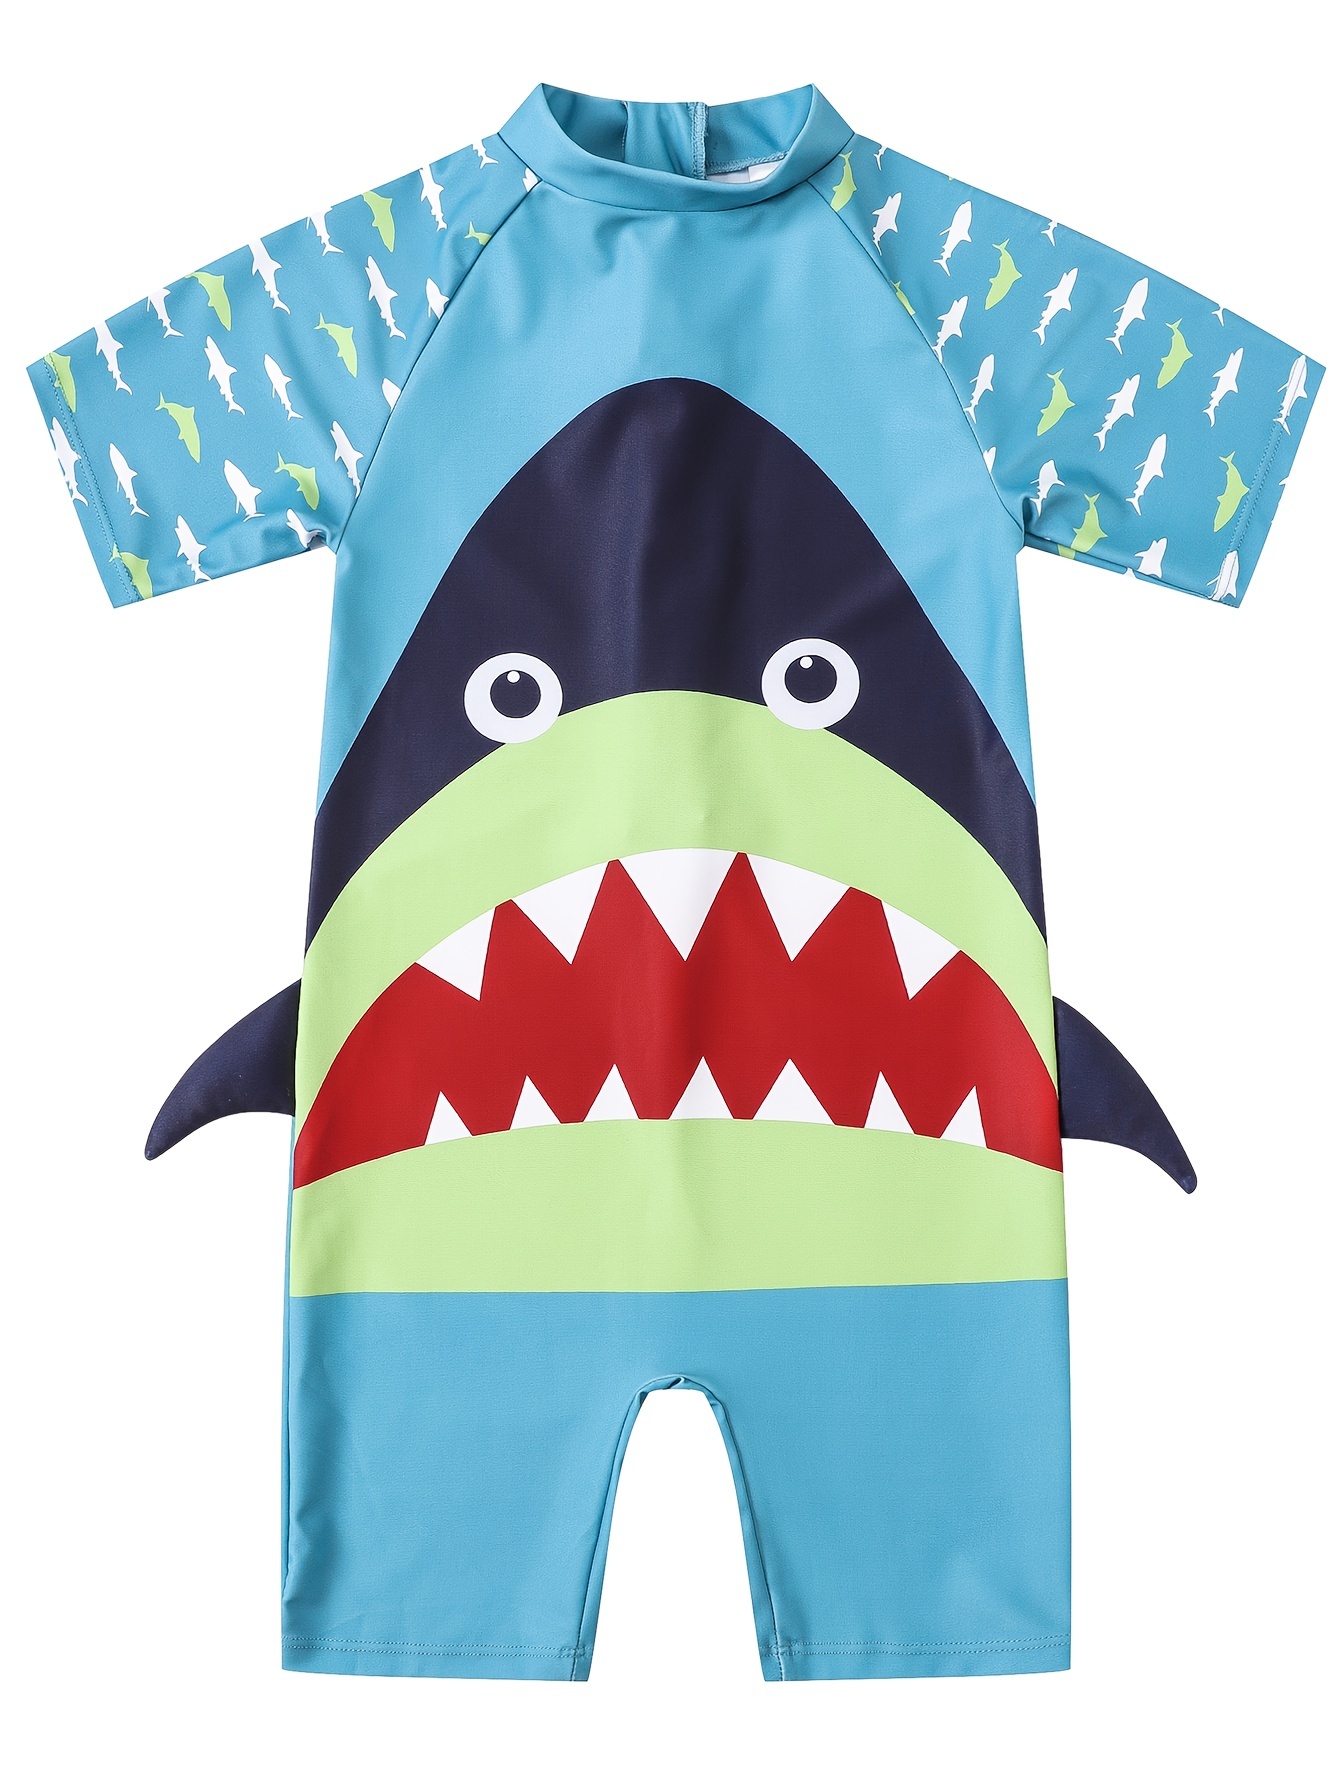 * Baby Boy Swimsuit, UPF 50+ Sun Protection One-piece Swimwear, Short  Sleeve Bathing Suits With Zipper, Rash Guard For Toddler Kids Beach Summer S